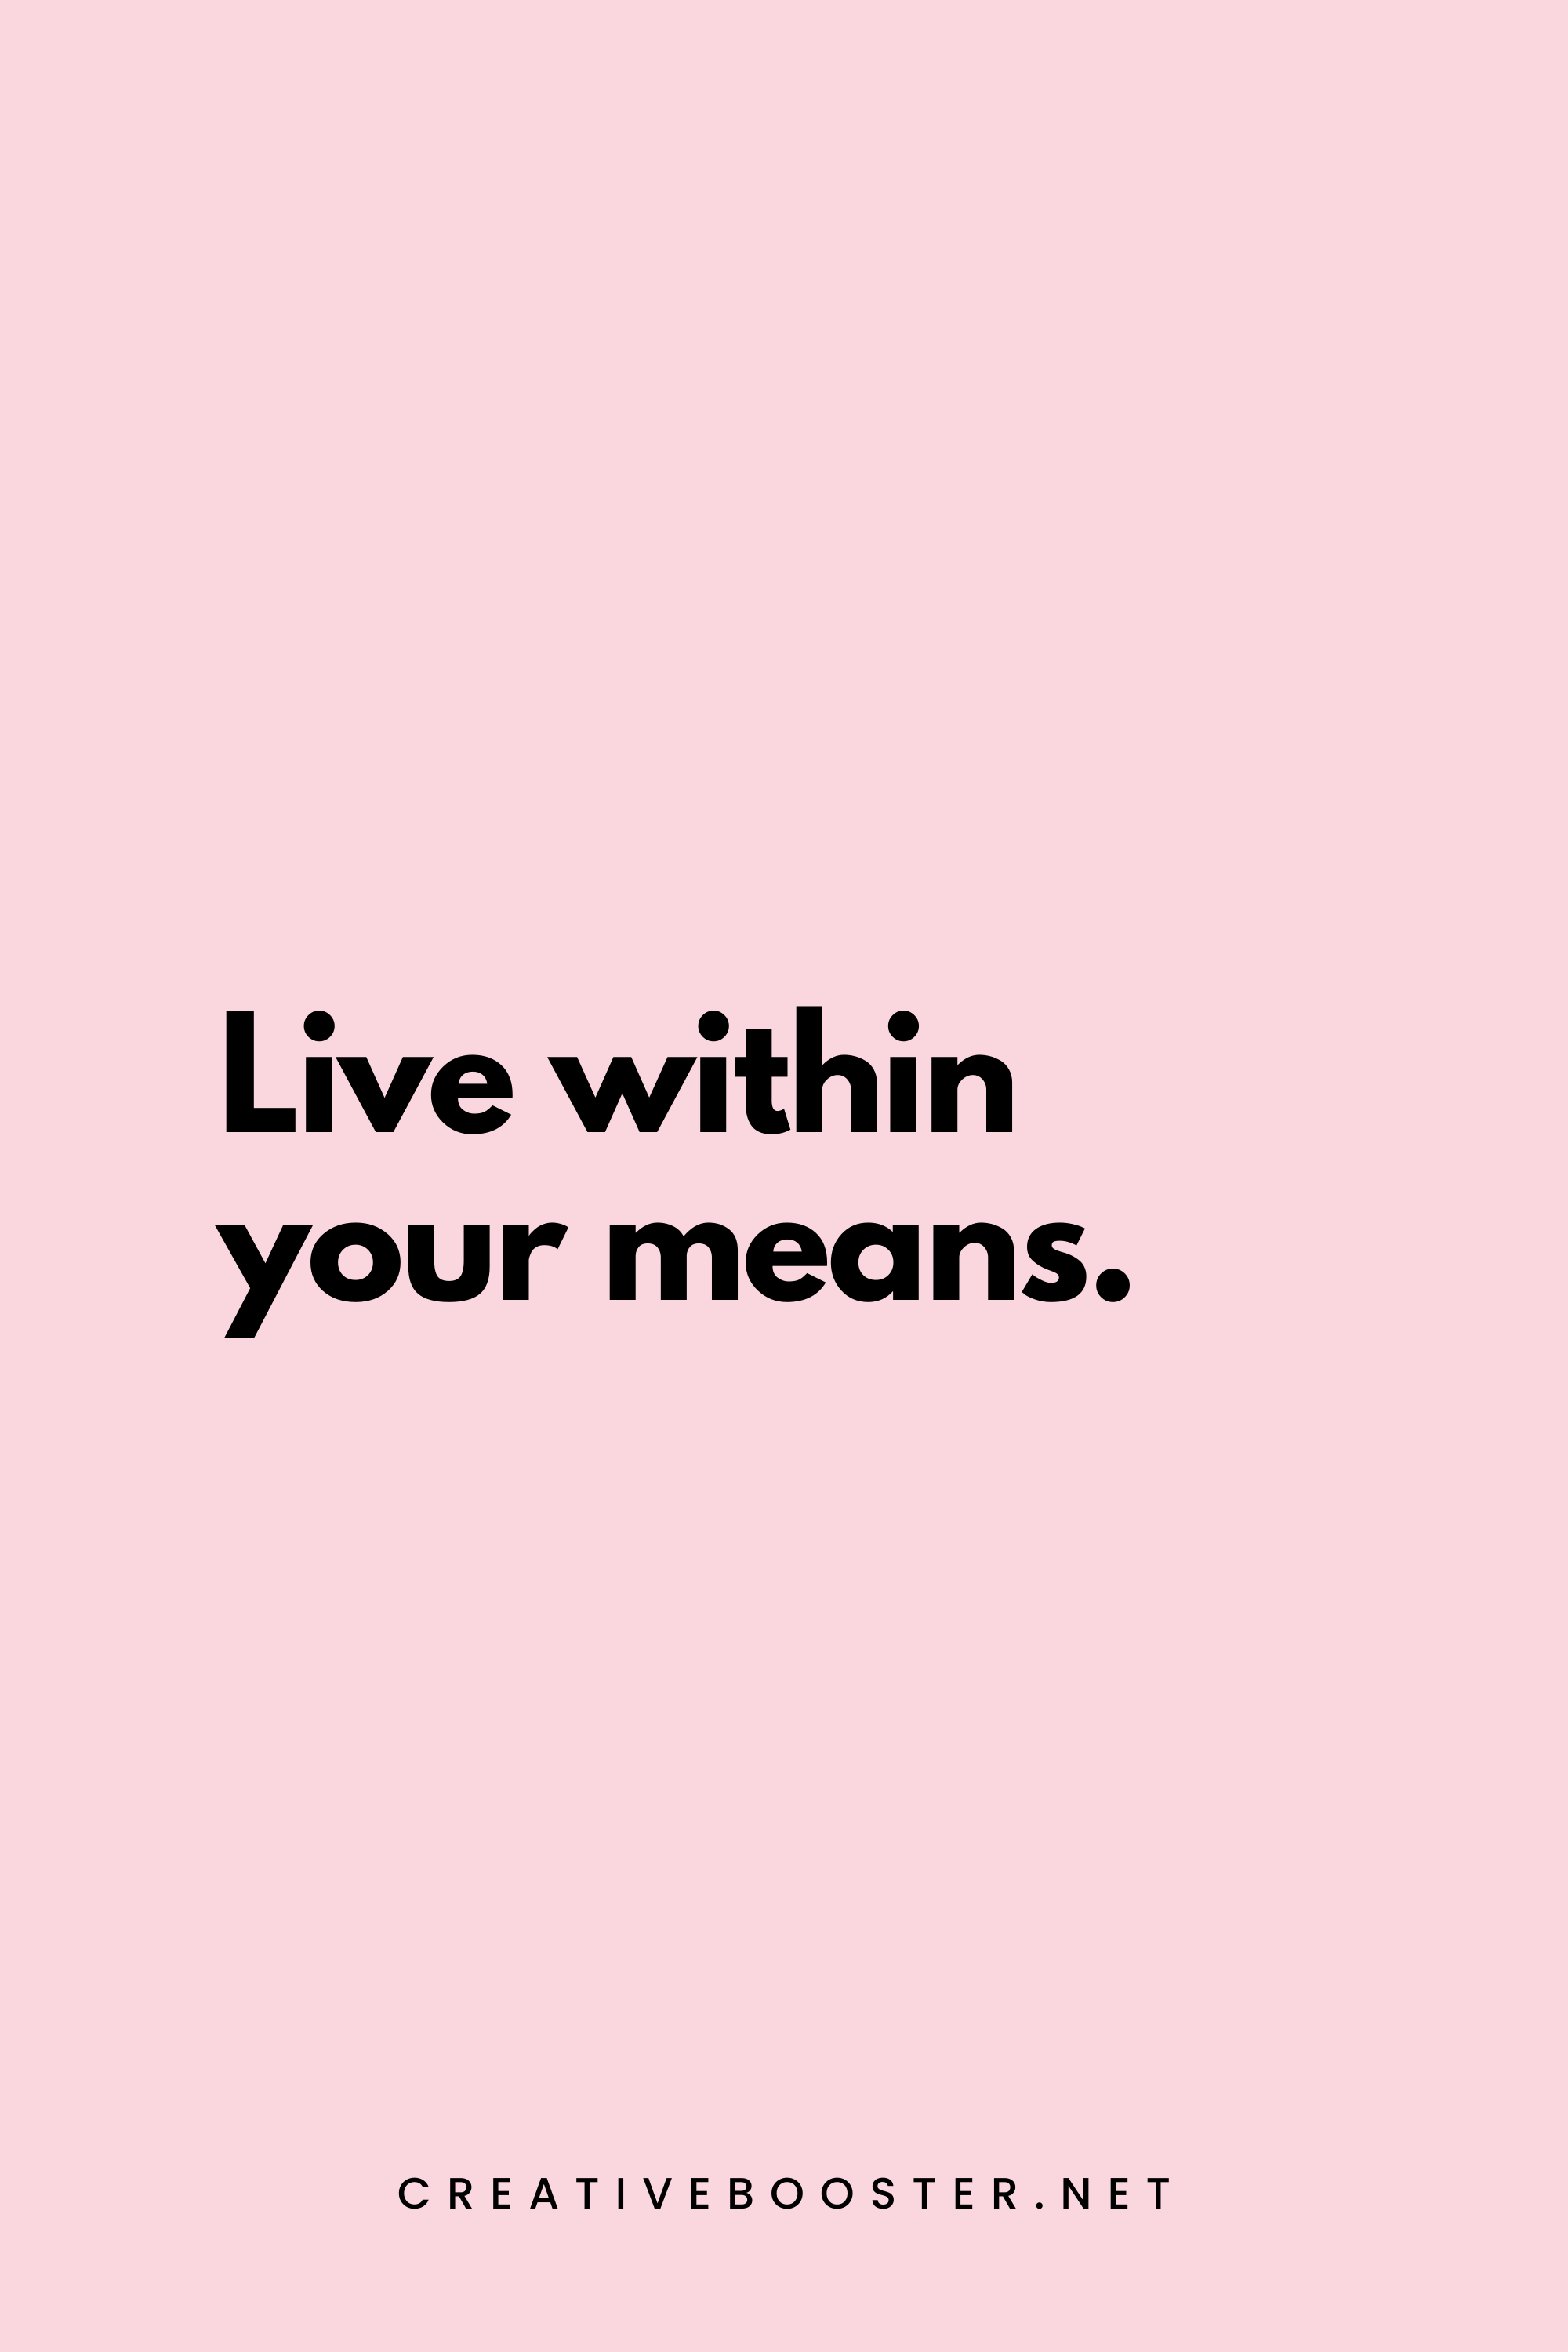 20. Live within your means. - Unknown - 2. Short Financial Freedom Quotes